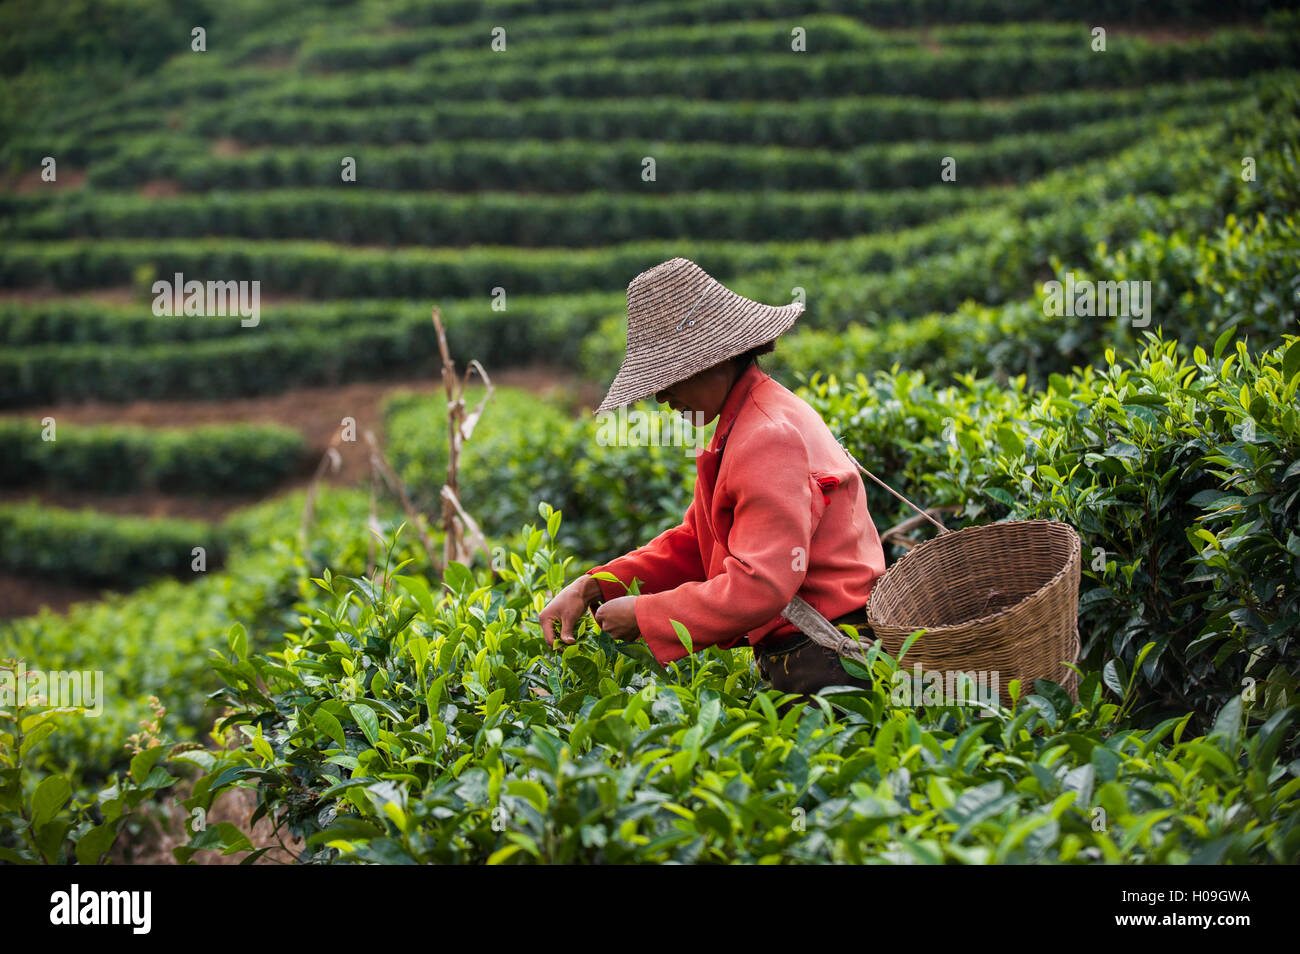 A woman collects tea leaves on a Puer tea estate in Yunnan Province, China, Asia Stock Photo